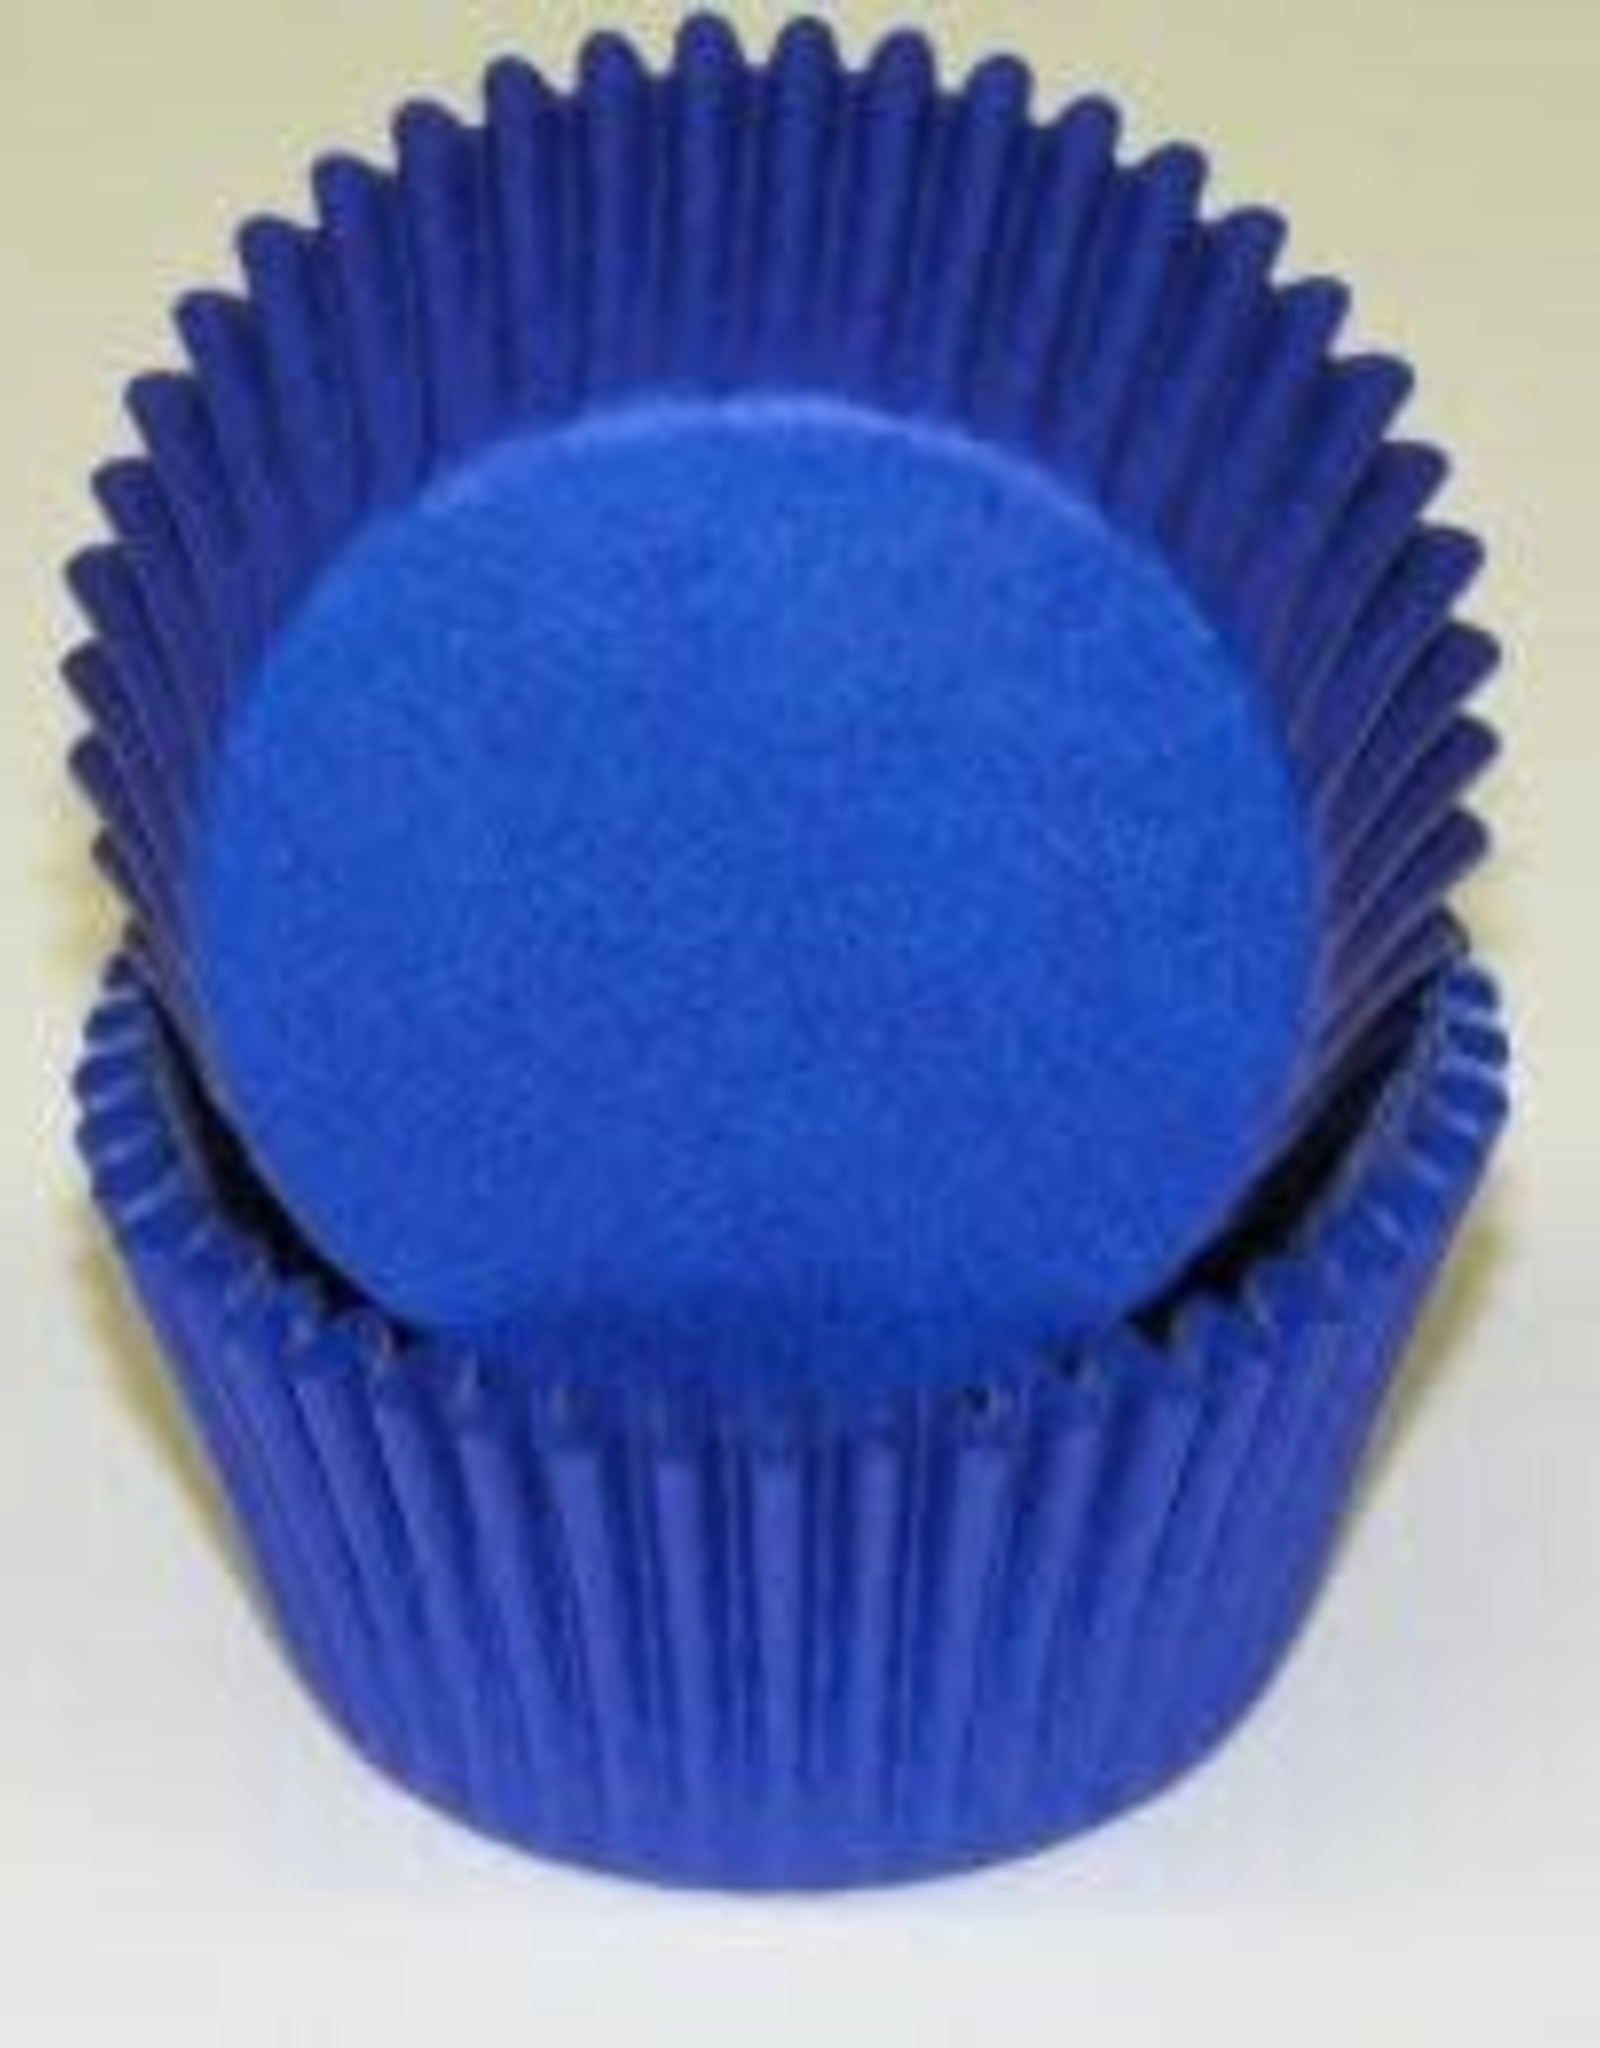 Blue (Royal) Baking Cups (30-35ct)